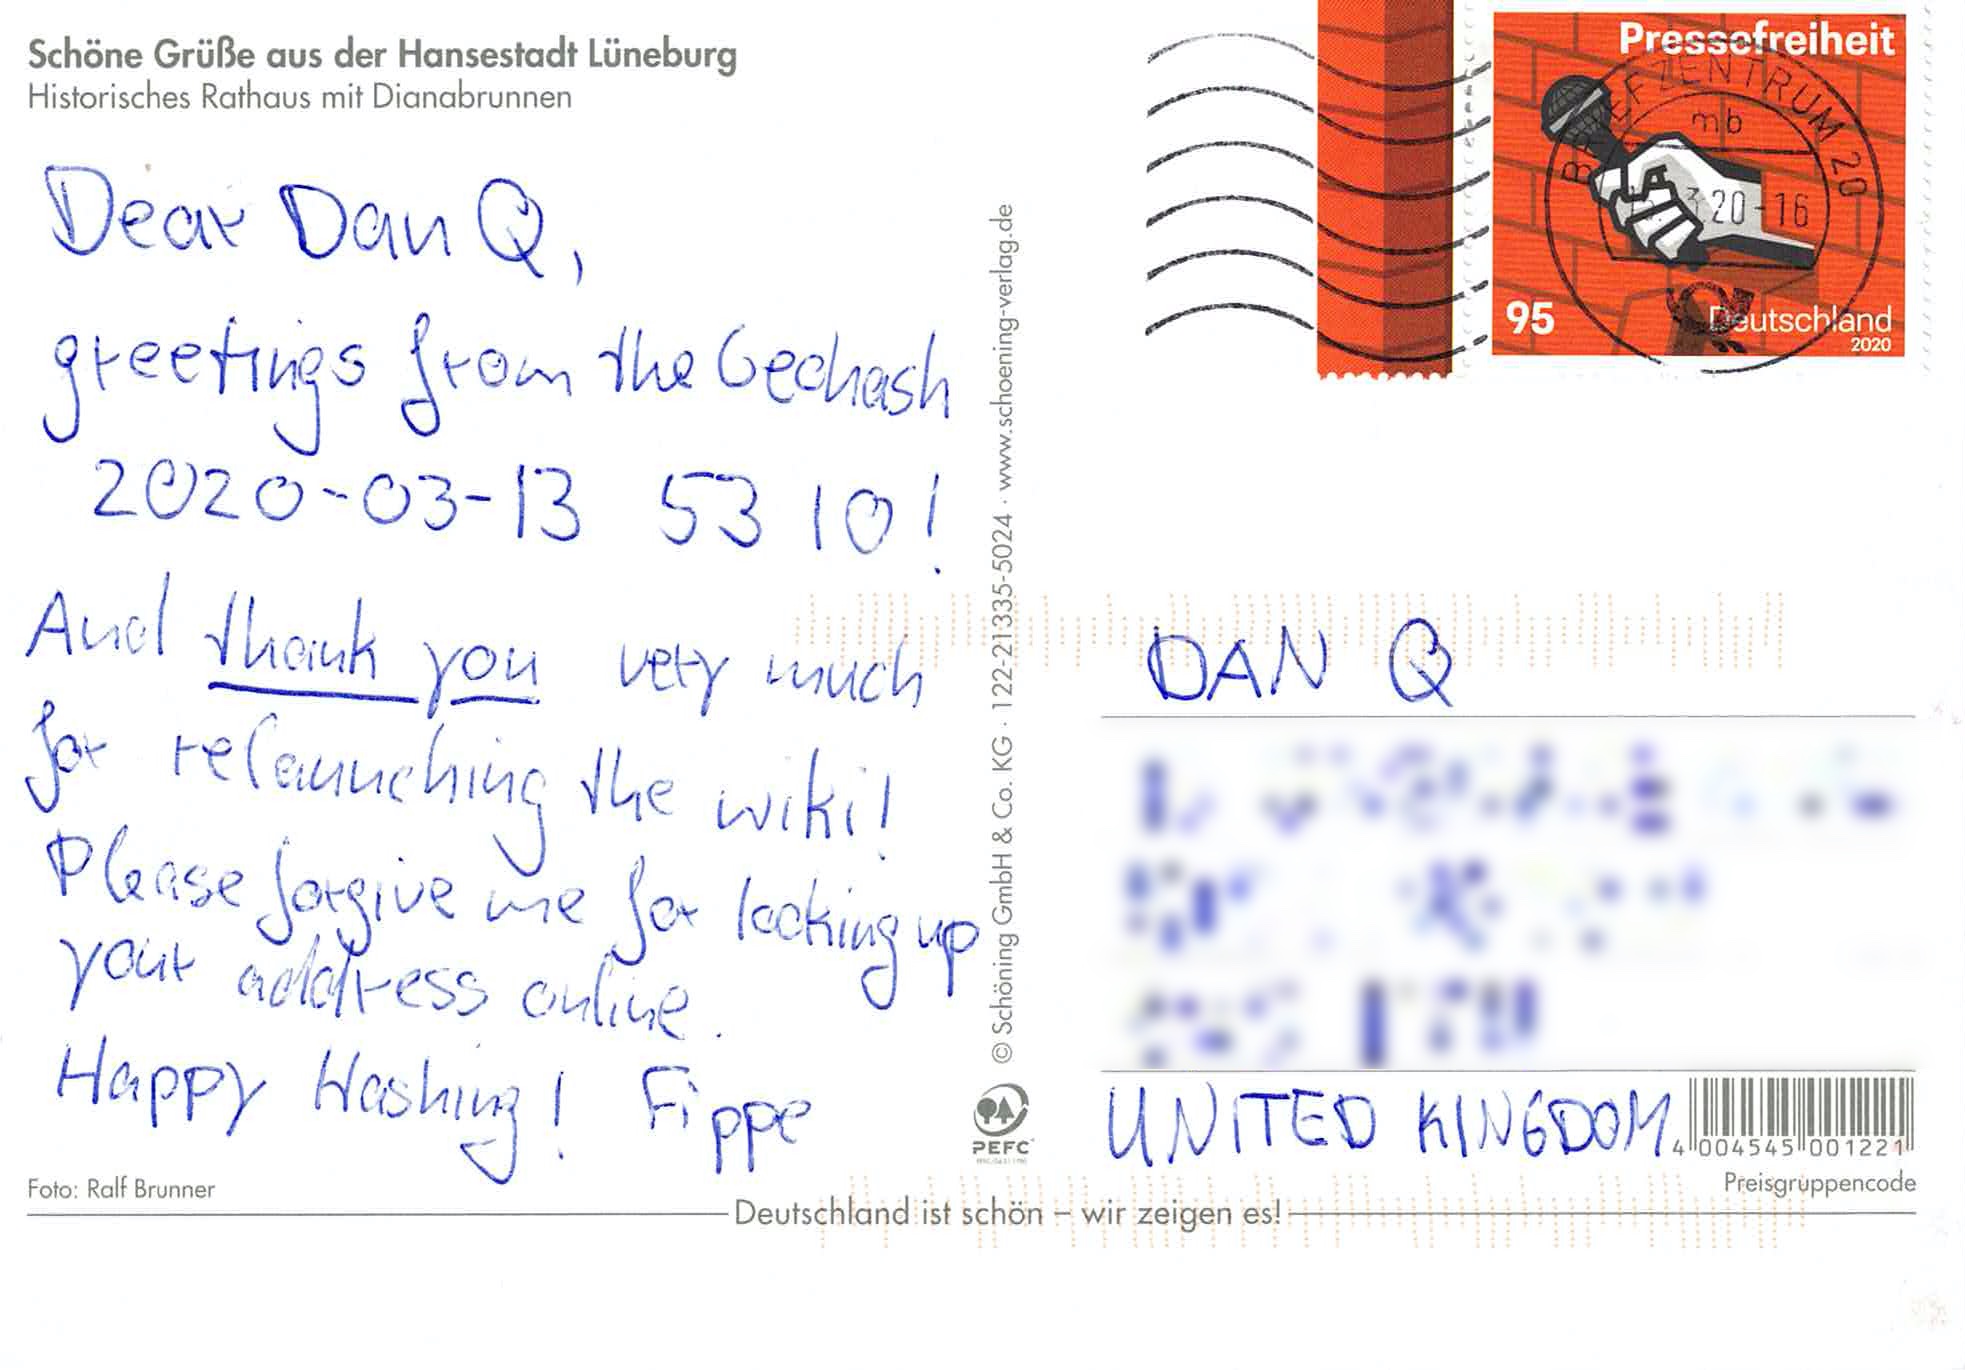 Postcard: Dear Dan Q, greetings from the Geohash 2020-03-13 53 10! And thank you very much for relaunching the wiki! Please forgive me for looking up your address online. Happy Hashing! Fippe